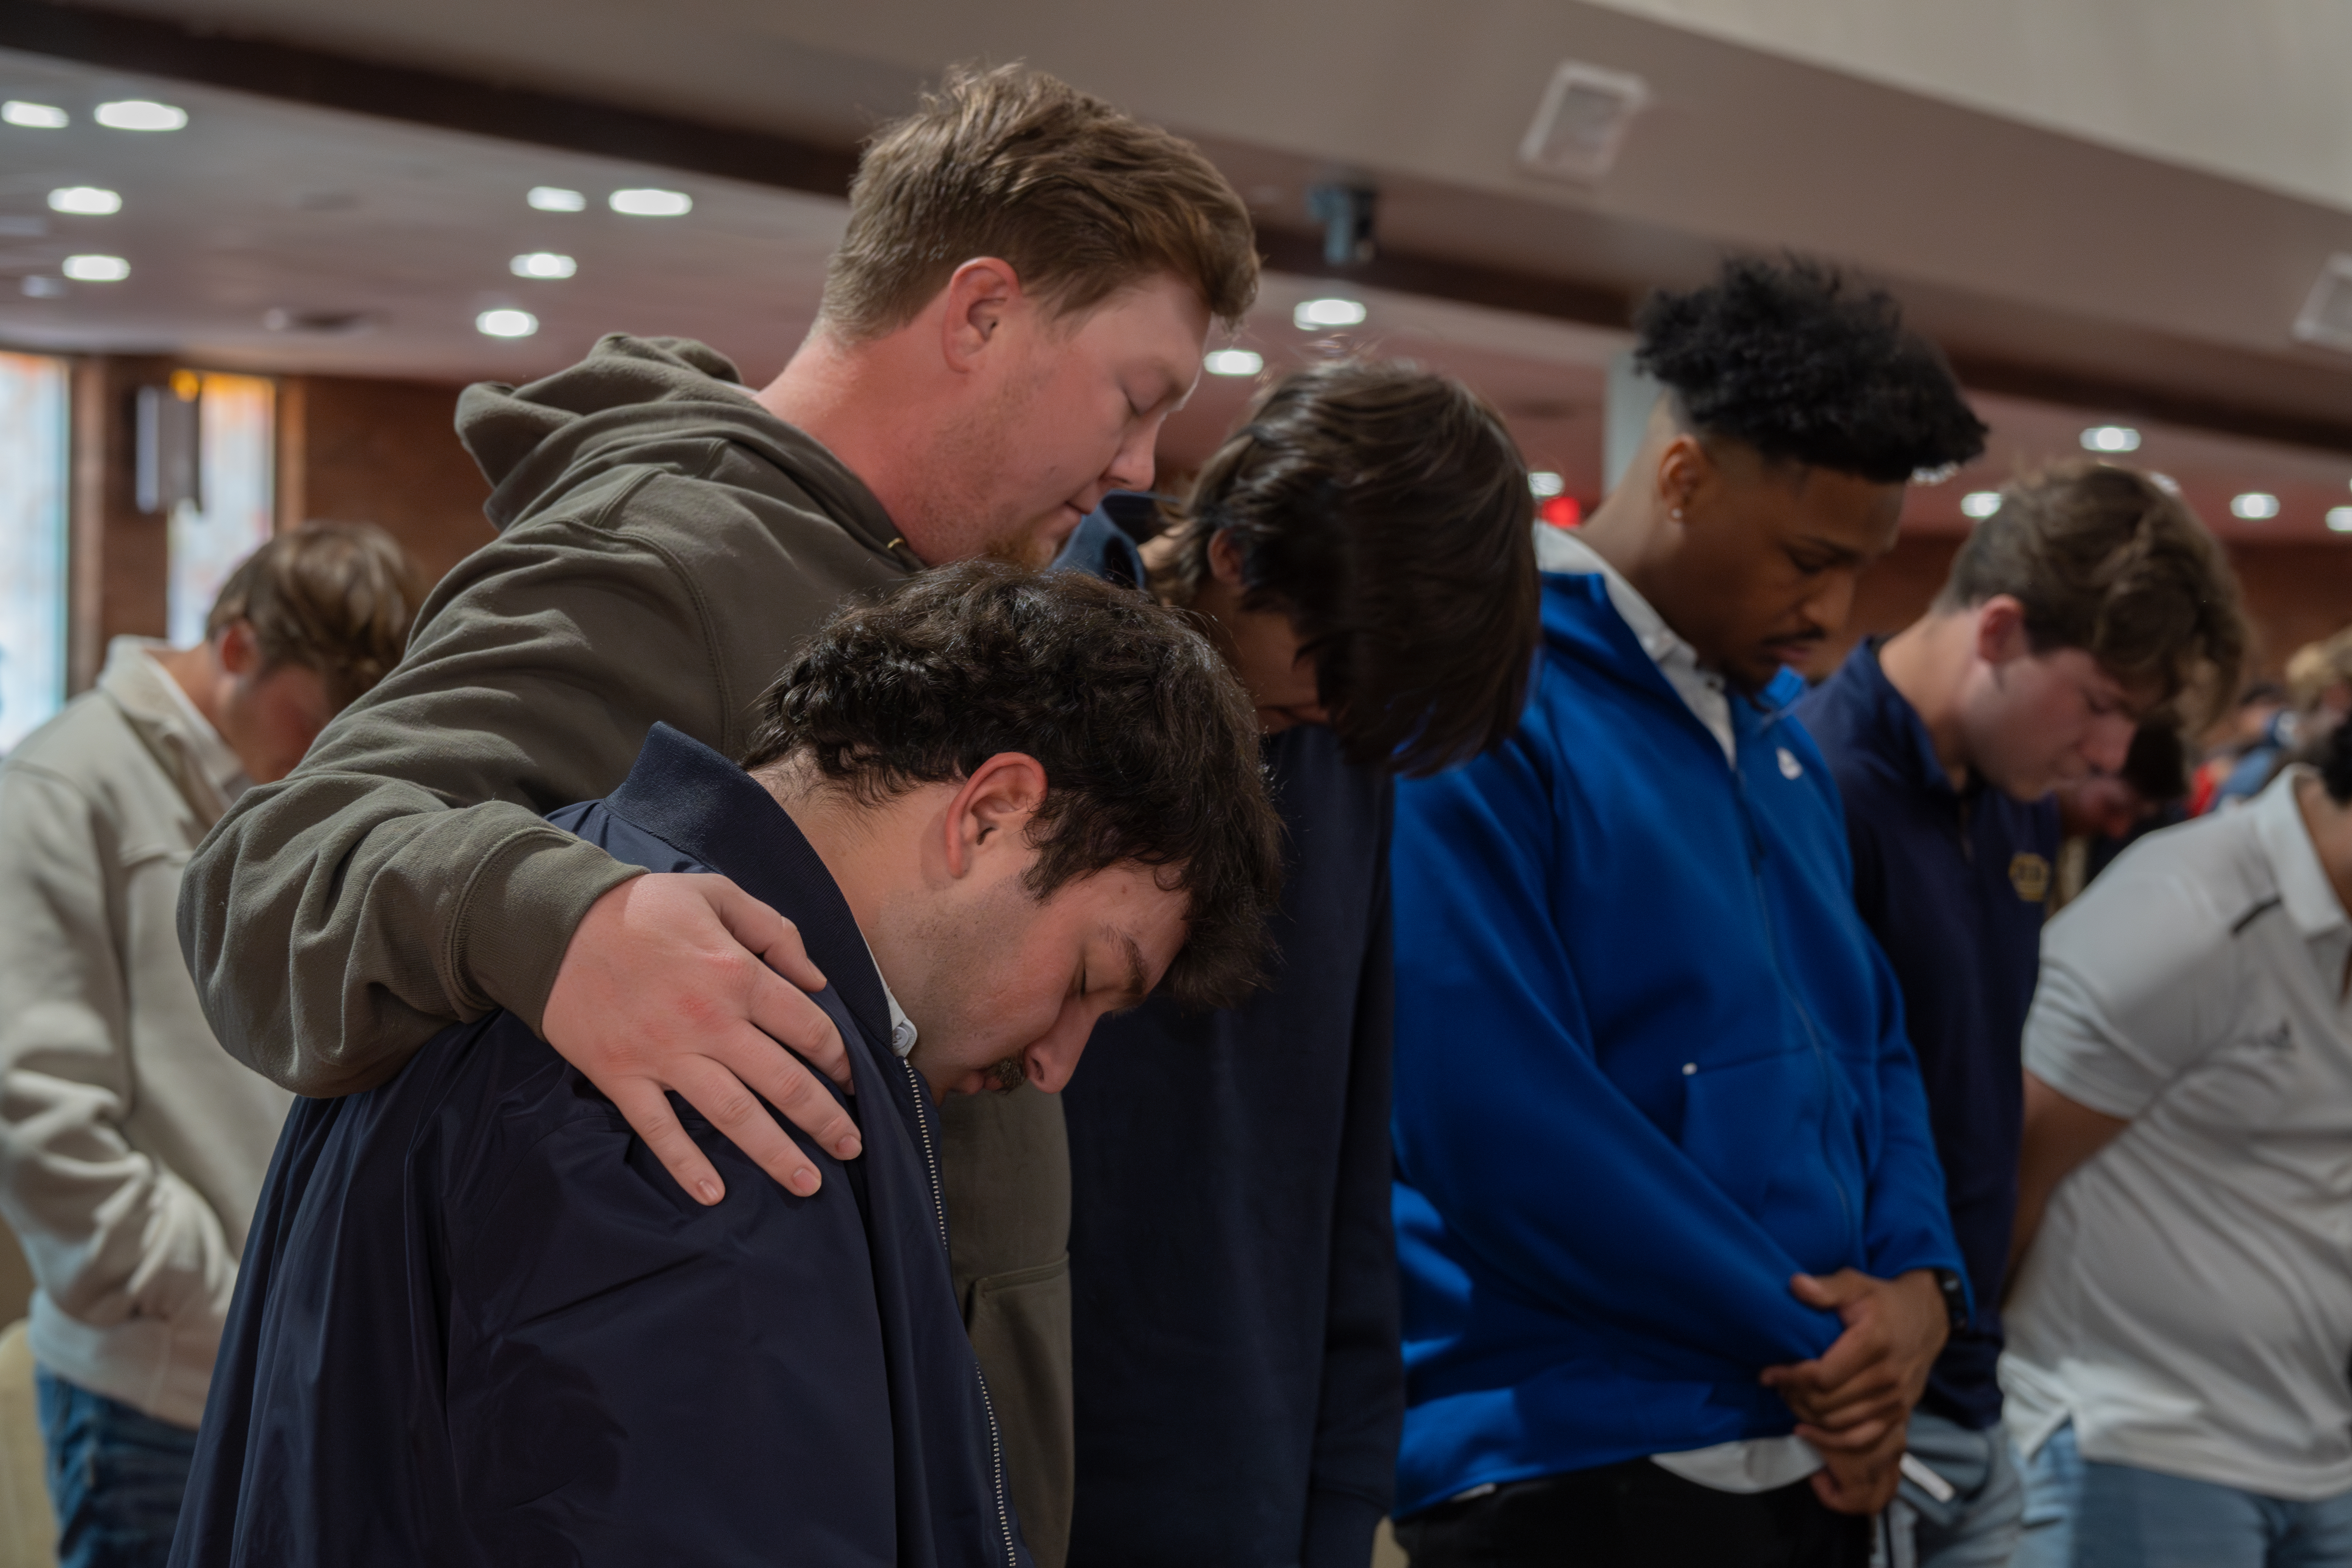 male students praying together